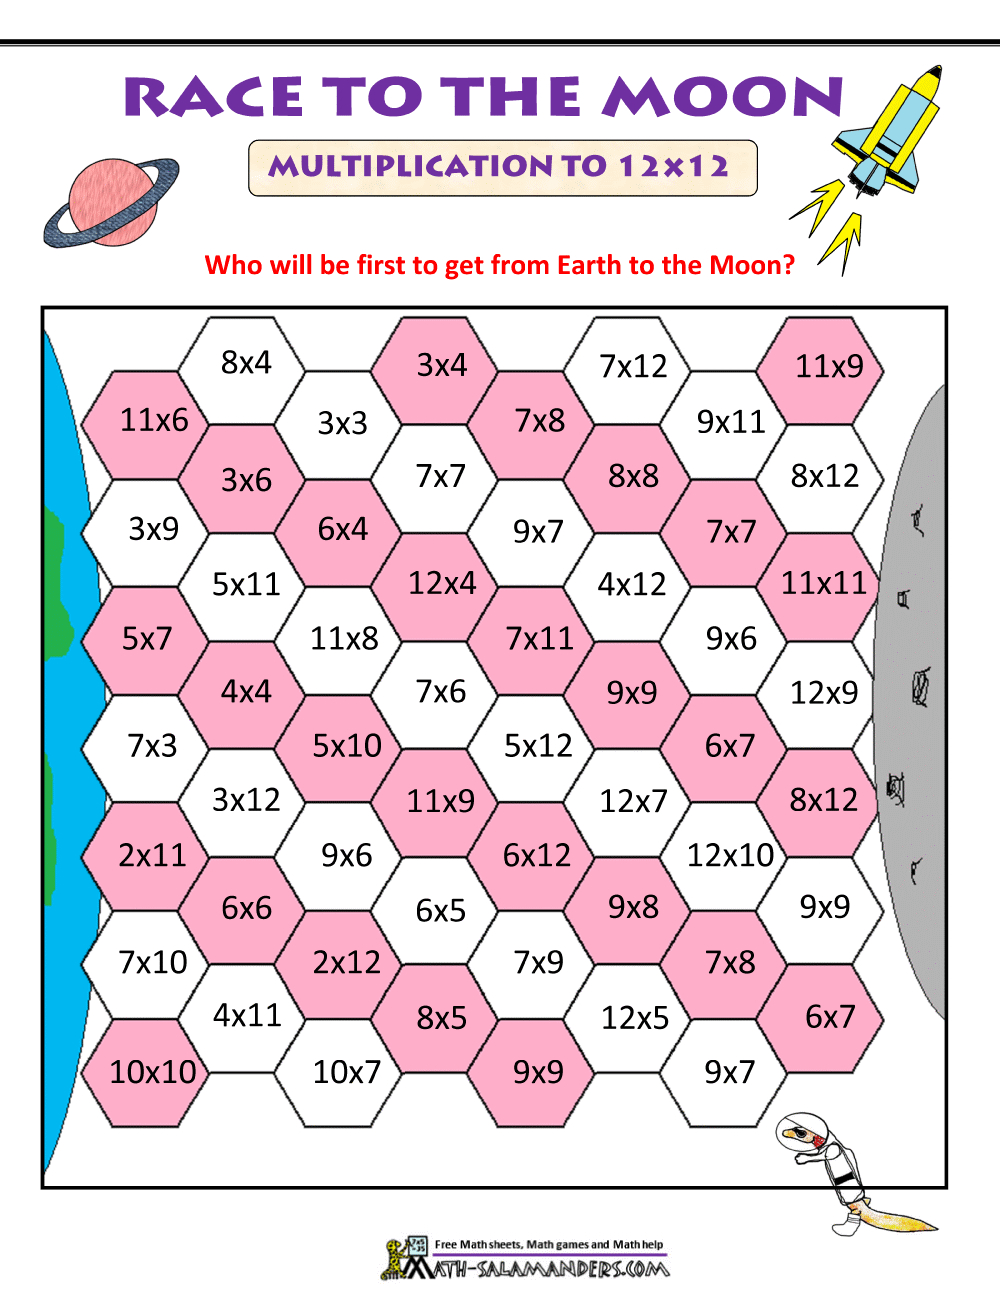 Multiplication Flash Cards Printable Numbers 1-10 Flashcards